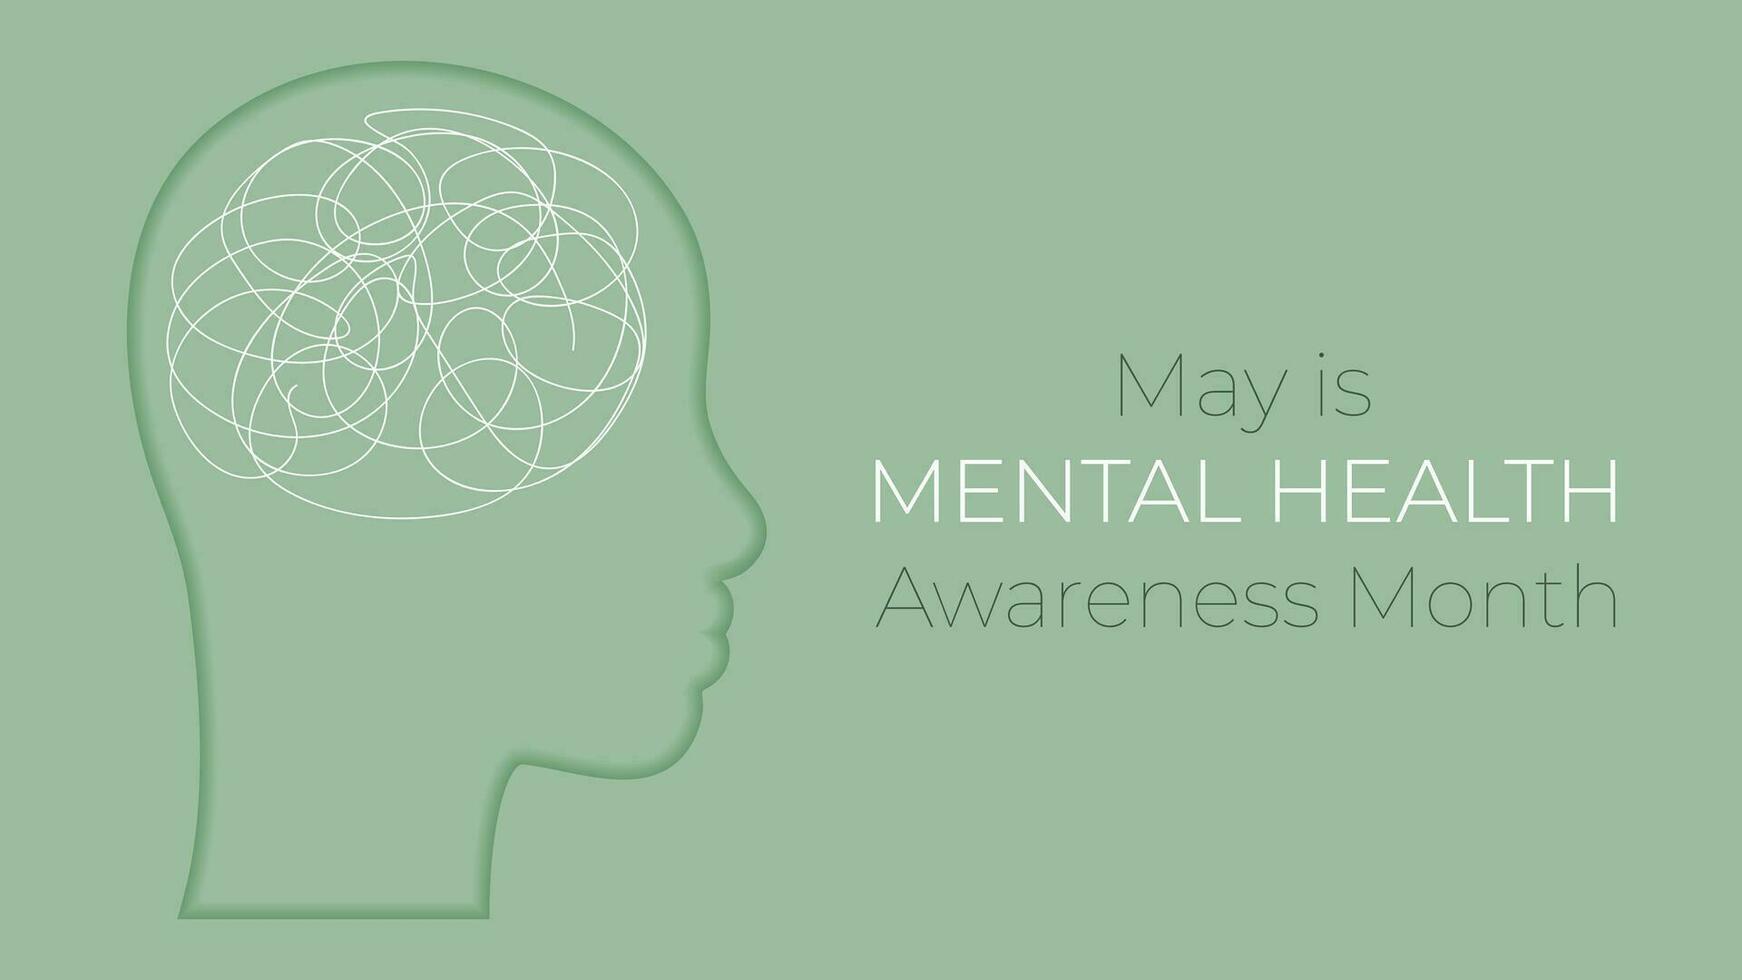 May is Mental Health Awareness Month banner. Minimalistic vector illustration of people silhouette in flat style. Design of Healthy lifestyle concept.